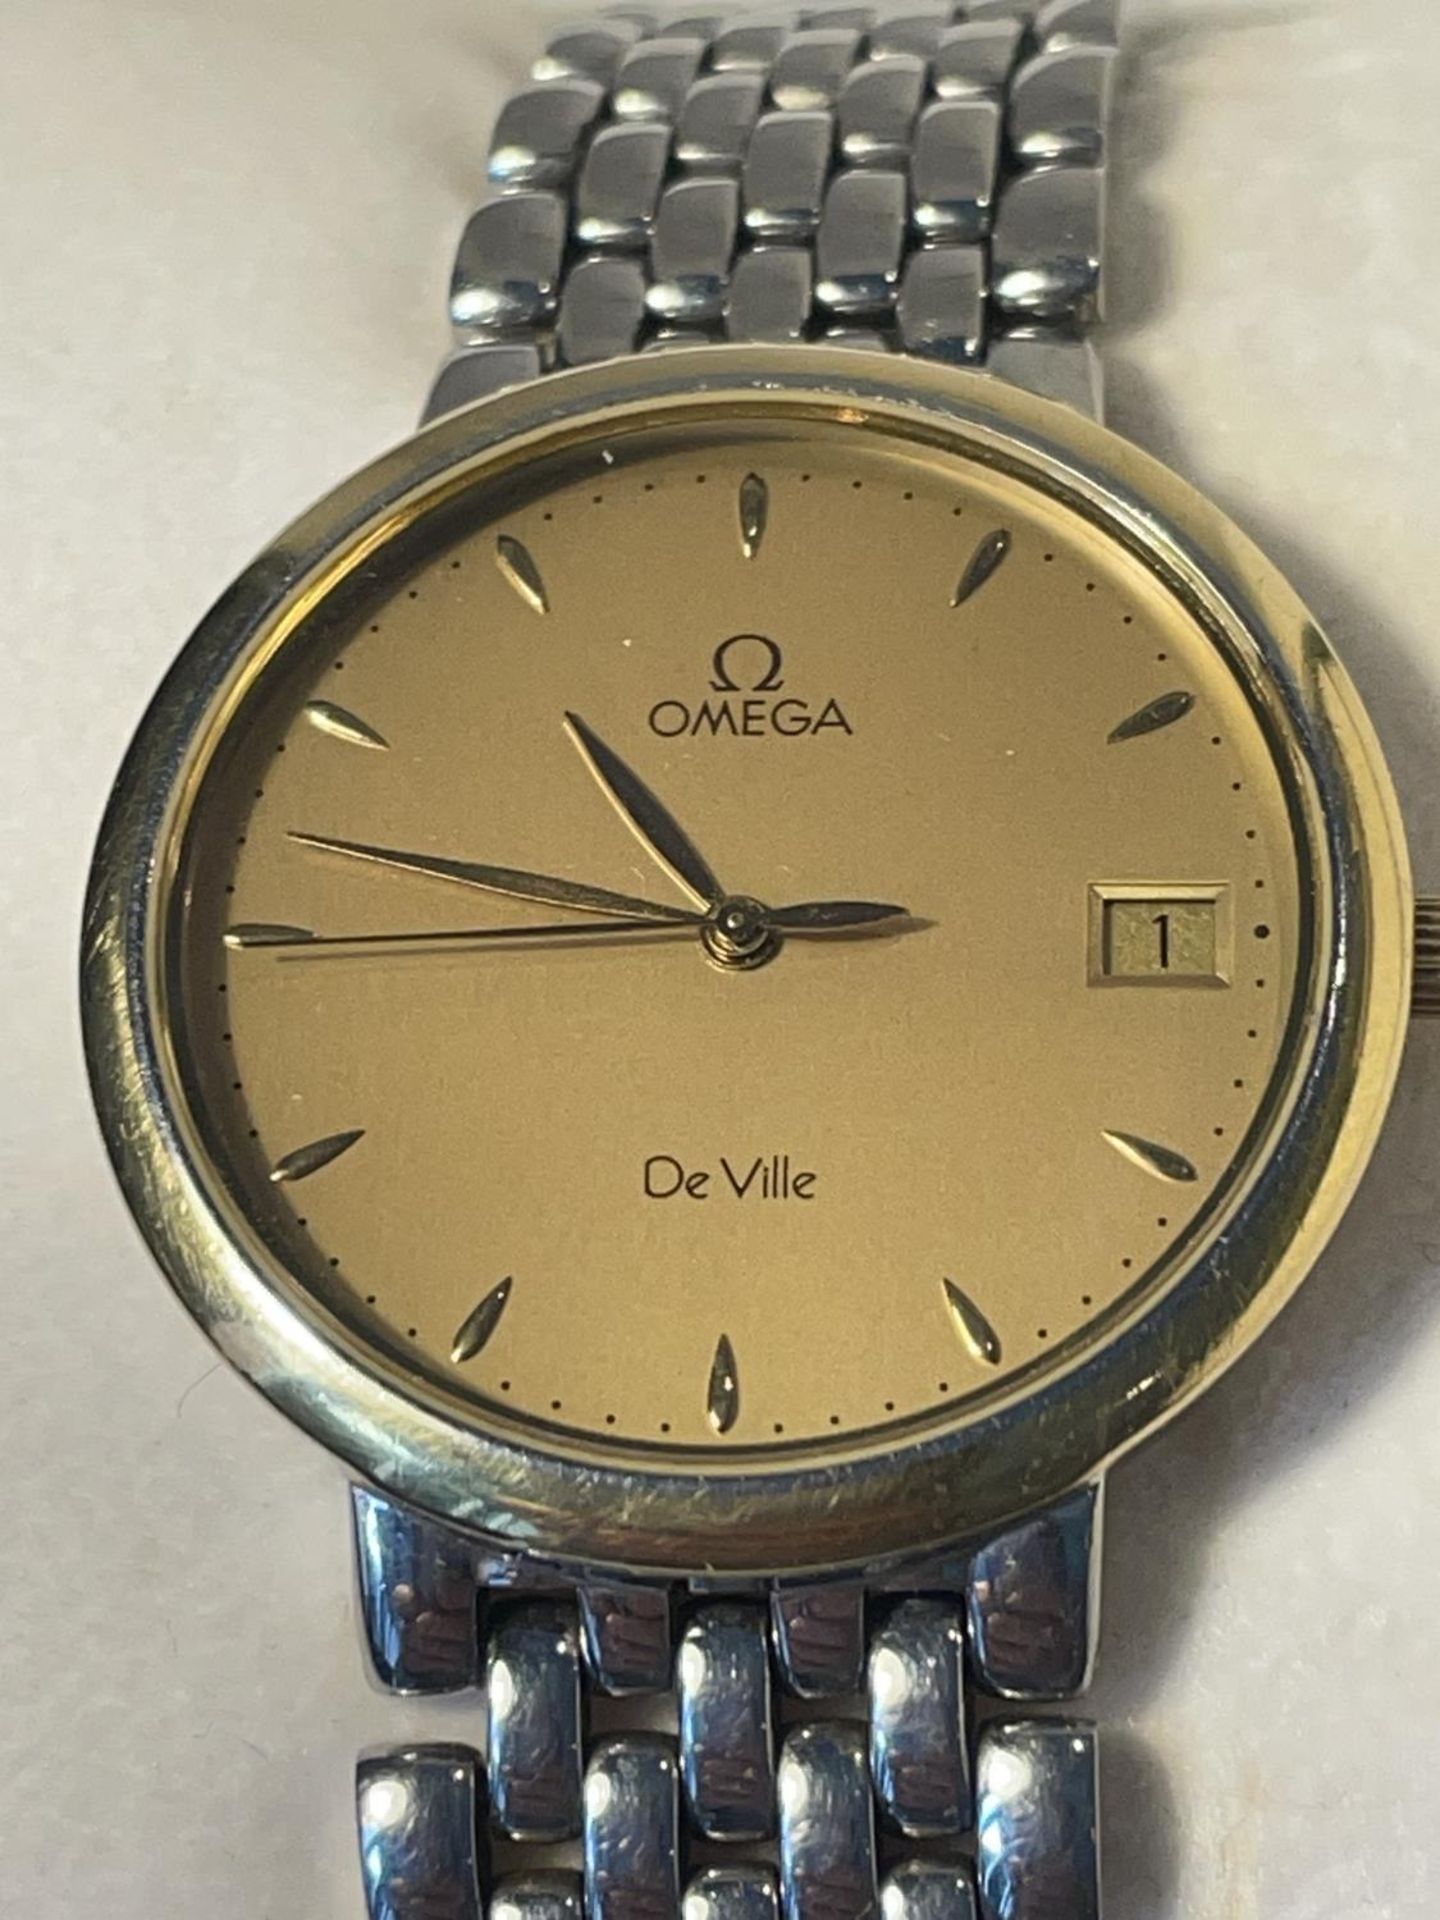 AN OMEGA DE VILLE WRIST WATCH WITH PRESENTATION BOX, OPERATING INSTRUCTIONS AND FURTHER PAPERWORK. - Image 3 of 9